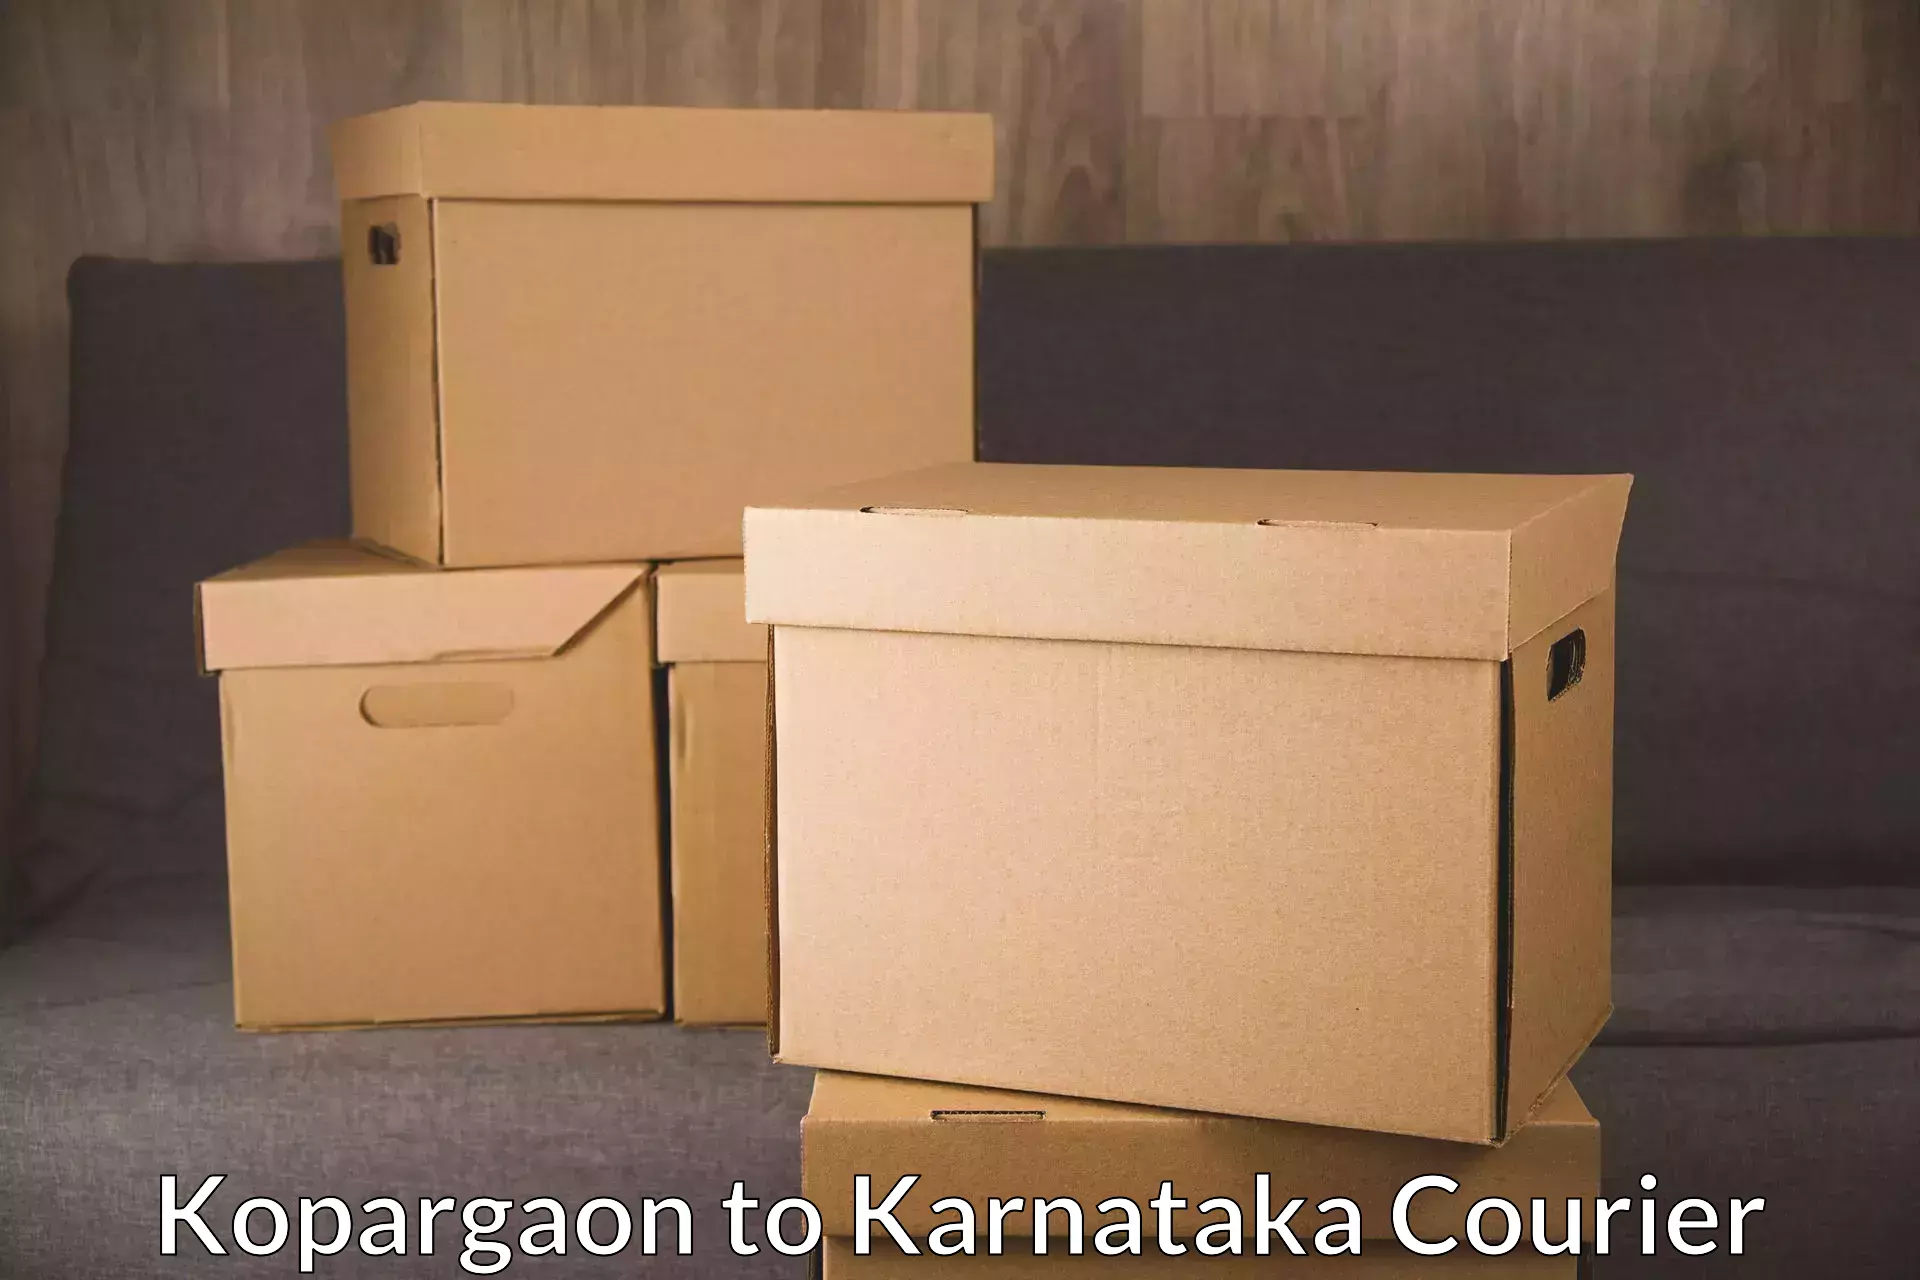 Supply chain delivery in Kopargaon to Belgaum